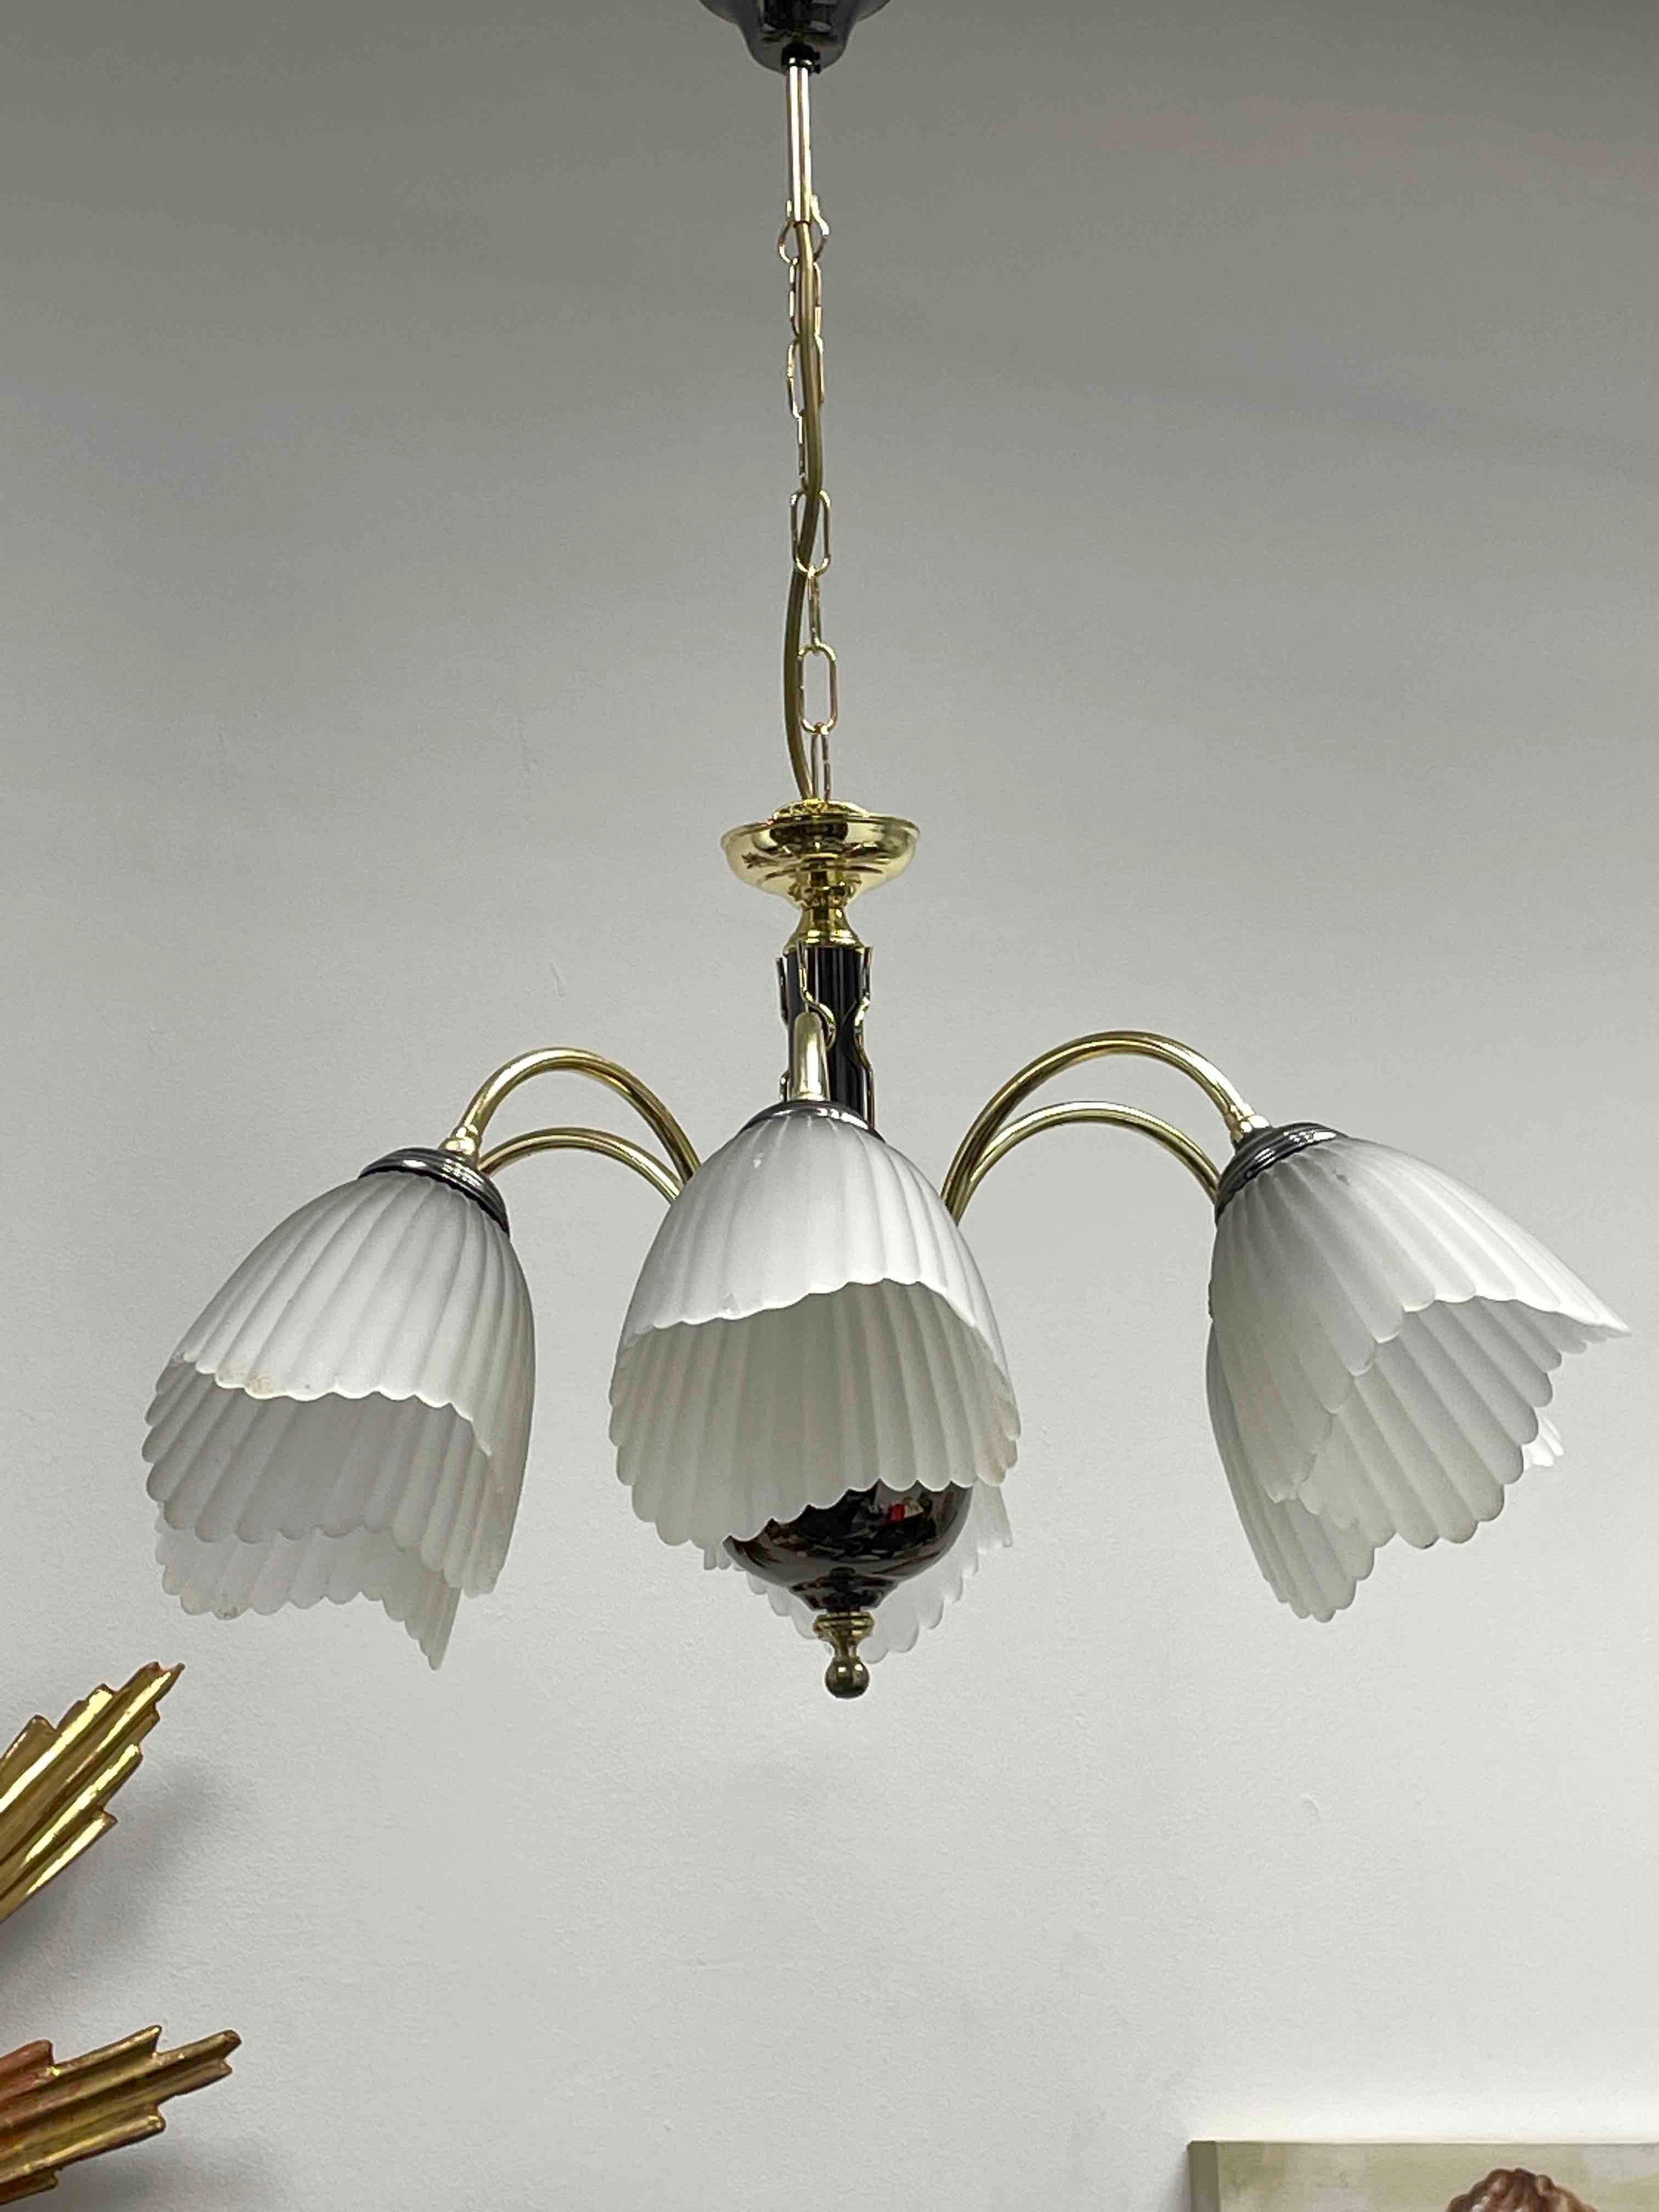 Beautiful chandelier or pendant light by Eglo Leuchten, Austria. An original vintage item manufactured in the 1980s. It is made of brass and black colored polished nickel. The Fixture requires six European E14 / 110 Volt Candelabra bulbs, each bulb